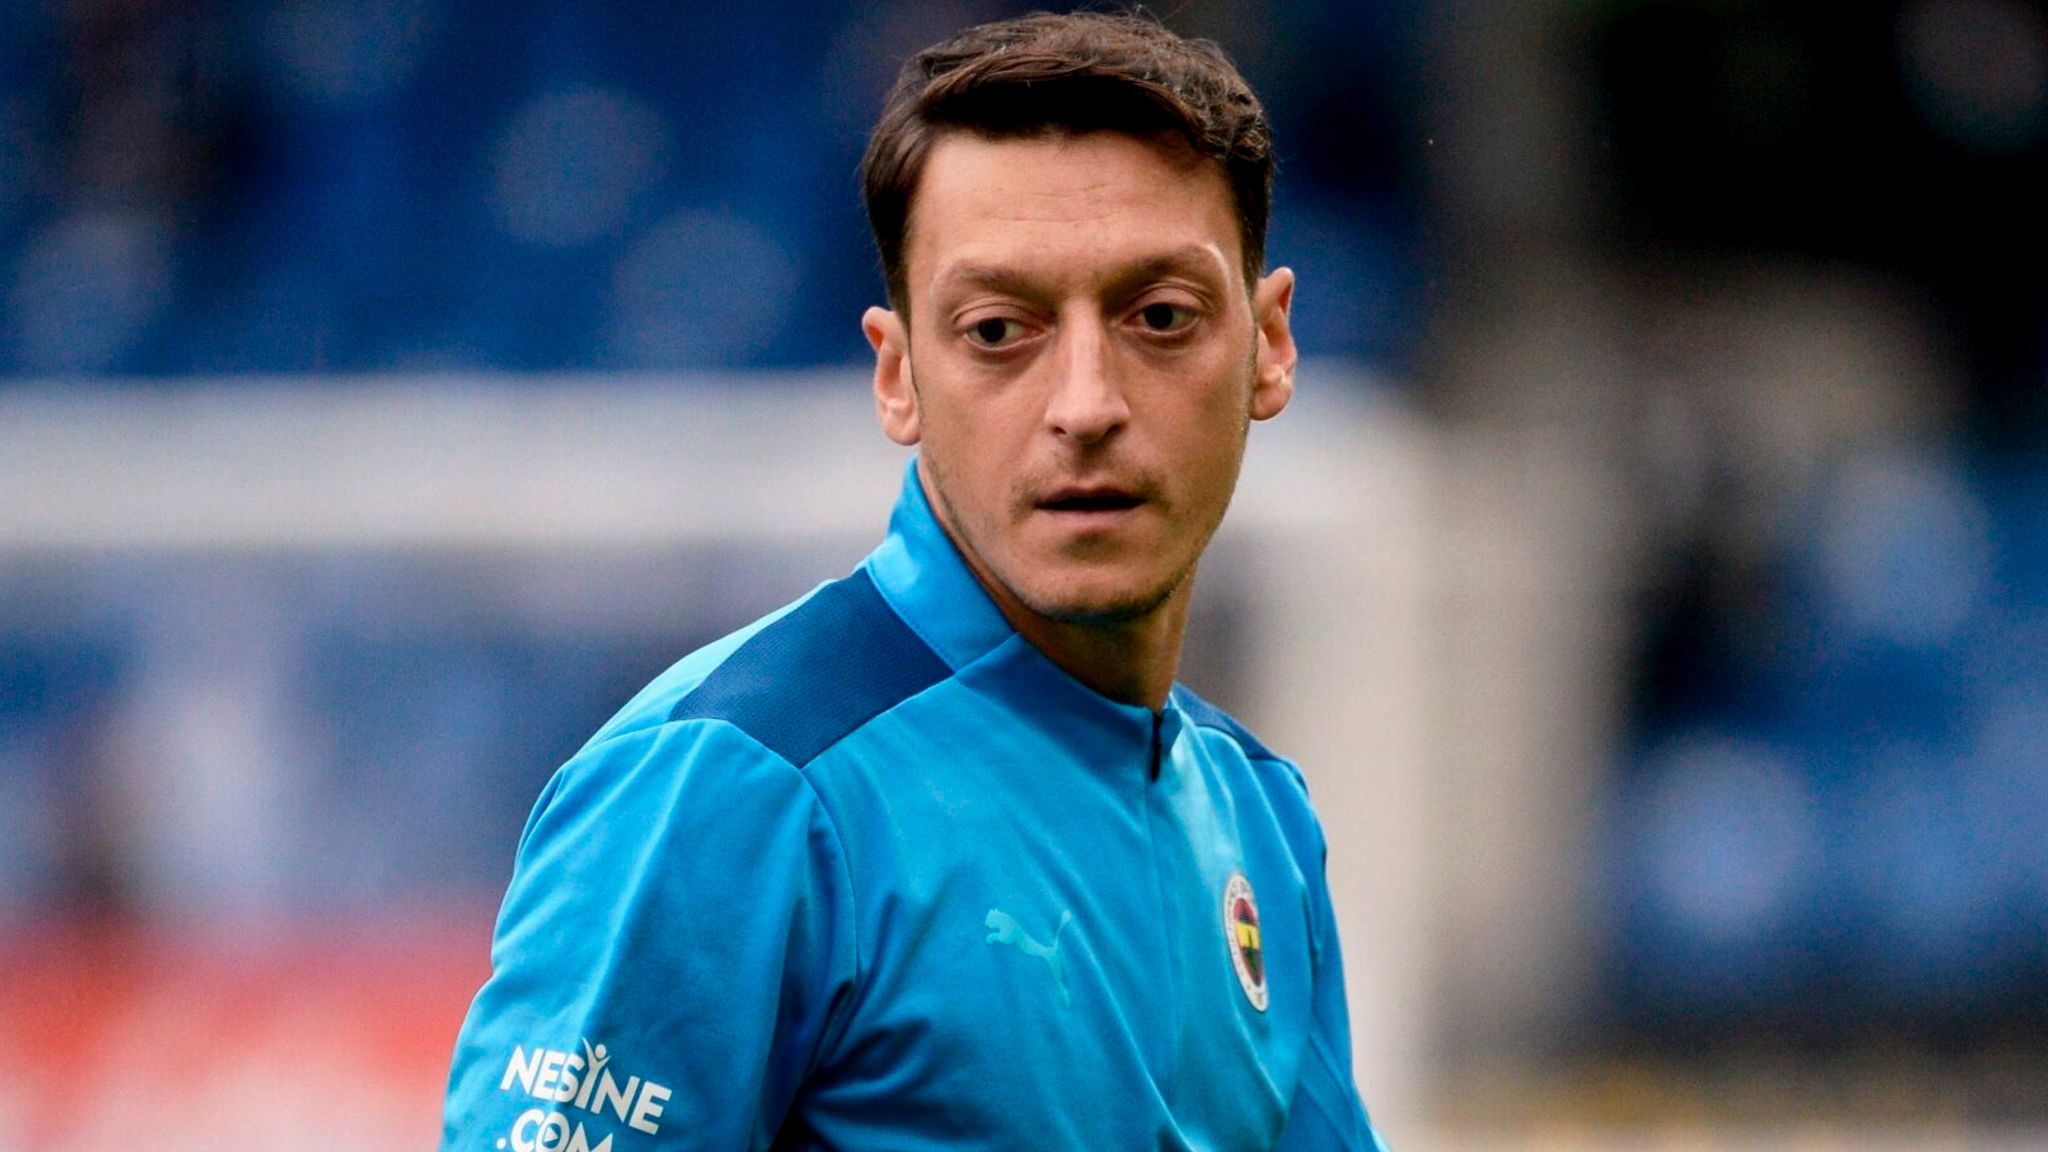 Mesut Ozil: Former Arsenal midfielder excluded from Fenerbahce's first team  | Football News | Sky Sports